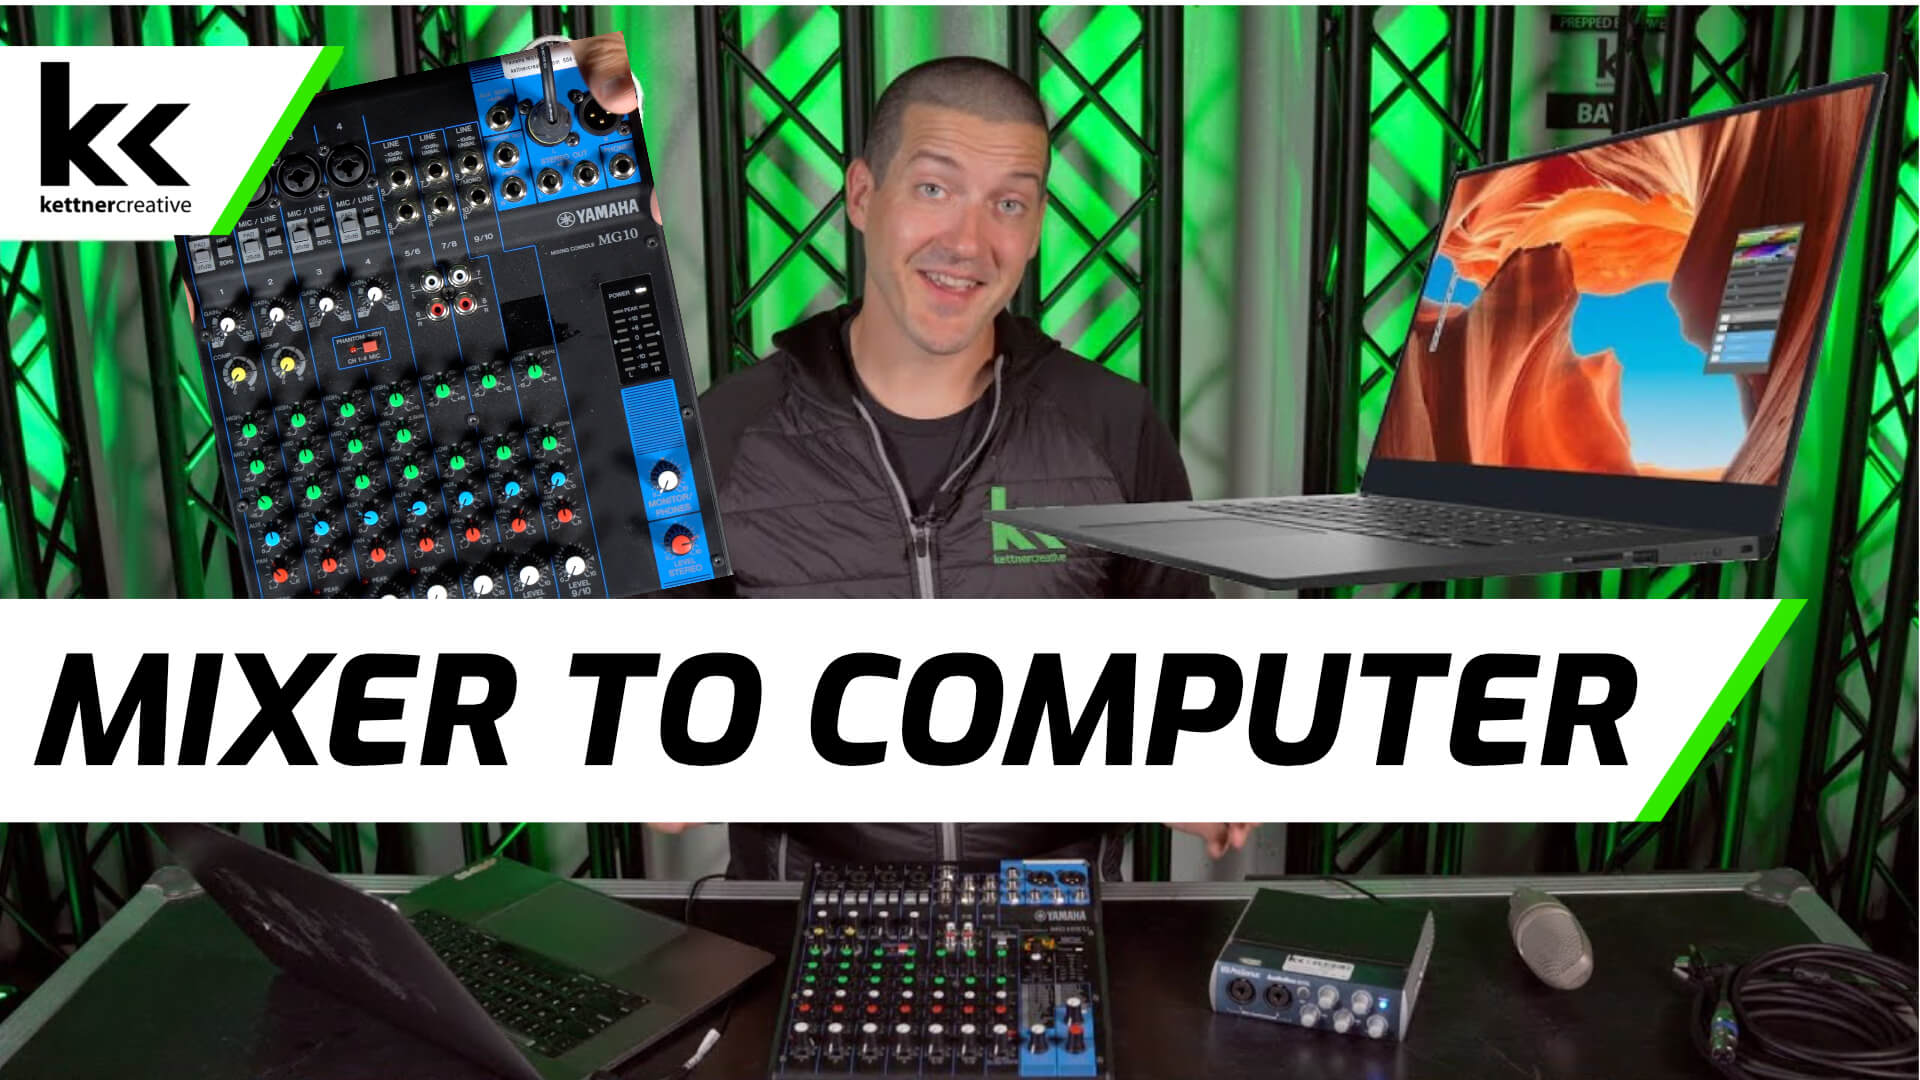 Audio Week: Which Live Sound Front of House Mixer is for You